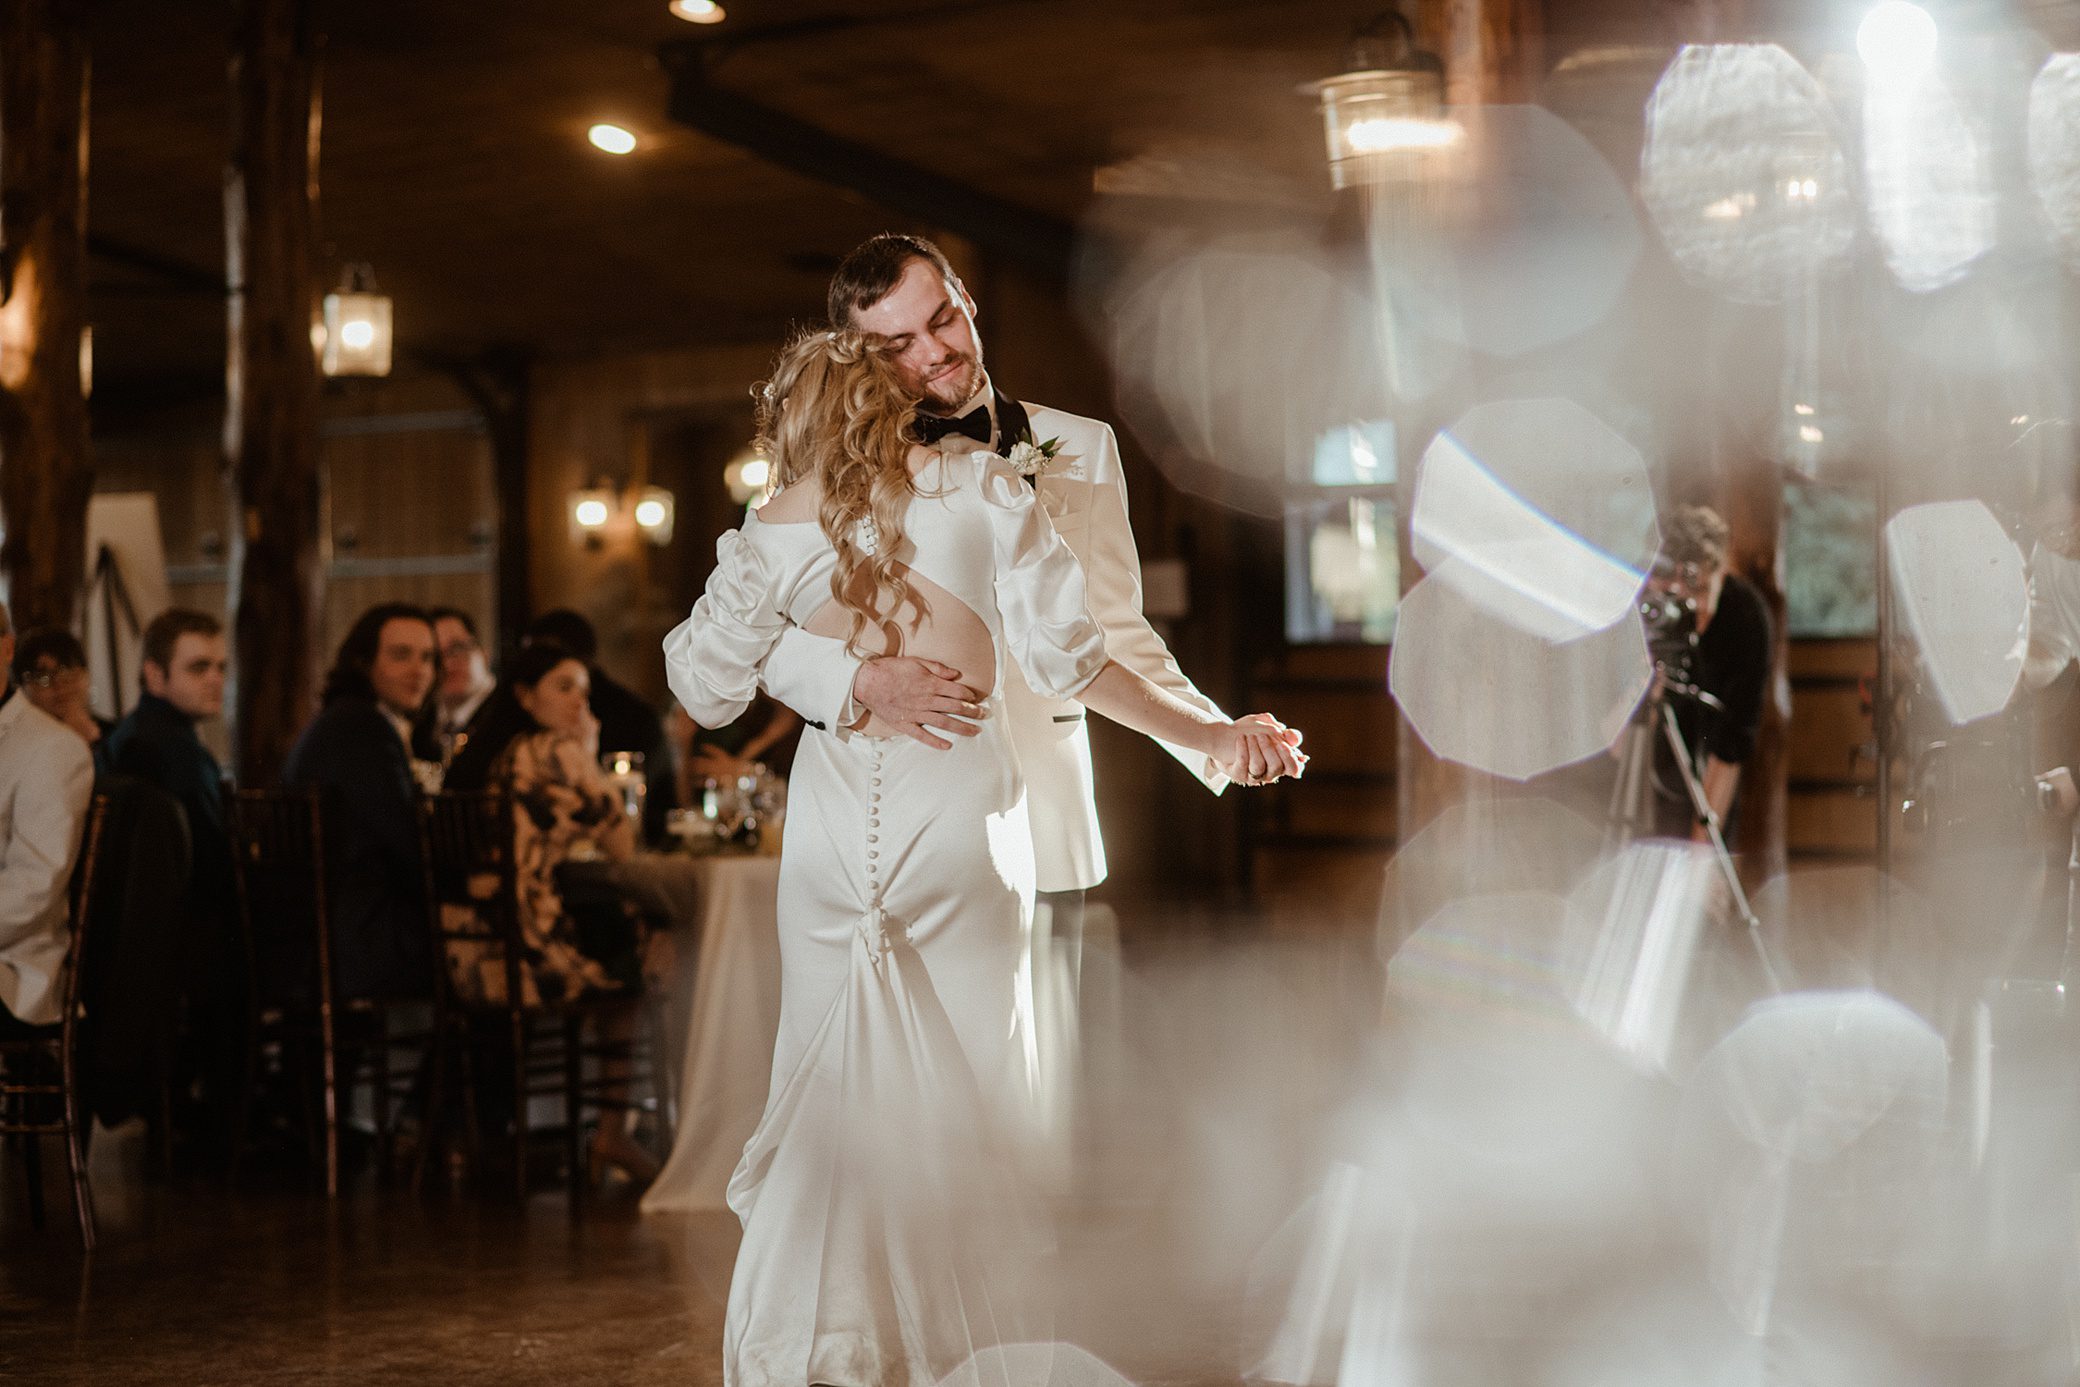 bride and groom share their first dance at theirAlbert's Lodge Wedding reception